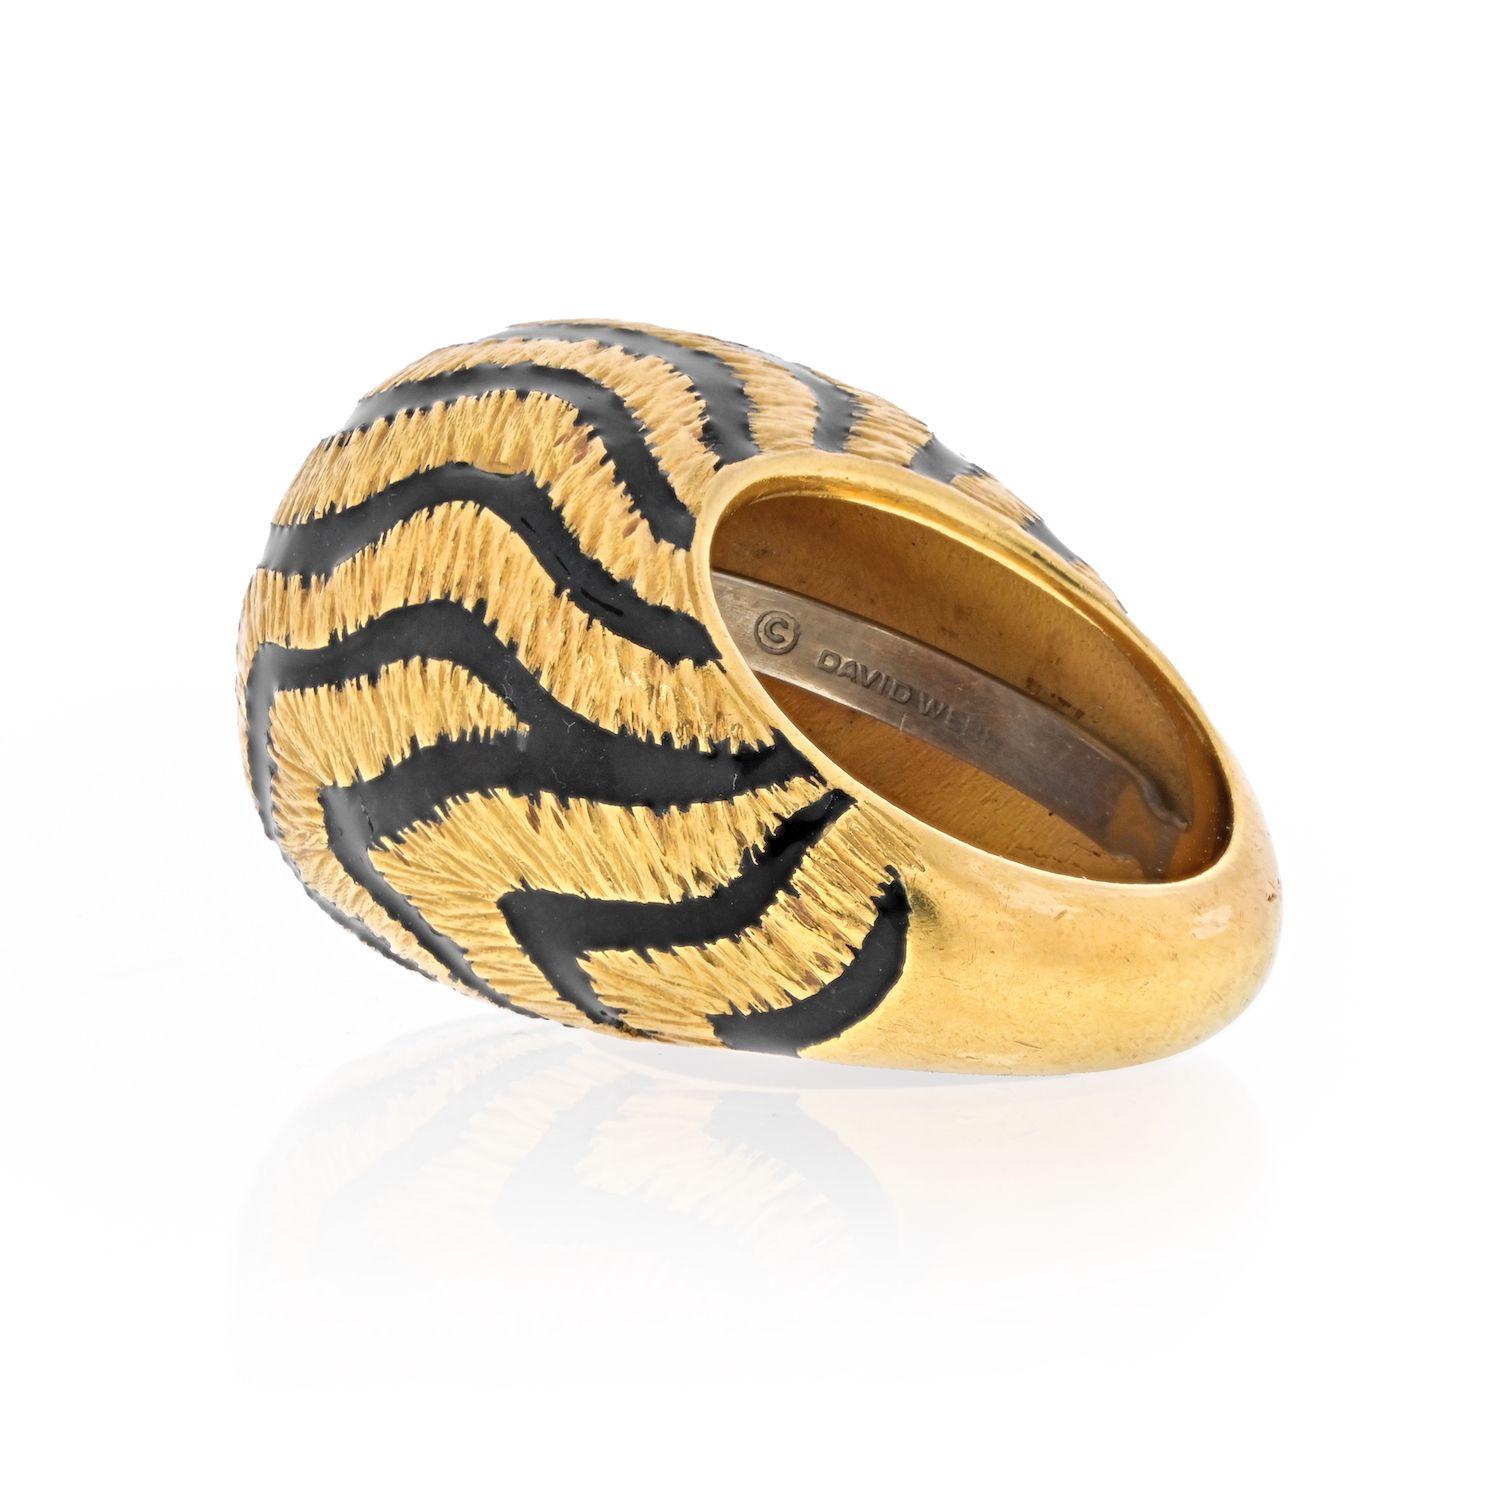 18K Yellow Gold Dome ring by David Webb decorated with black enamel wavy zebra stripes. 
Excellent condition, perfect for everyday wear. 